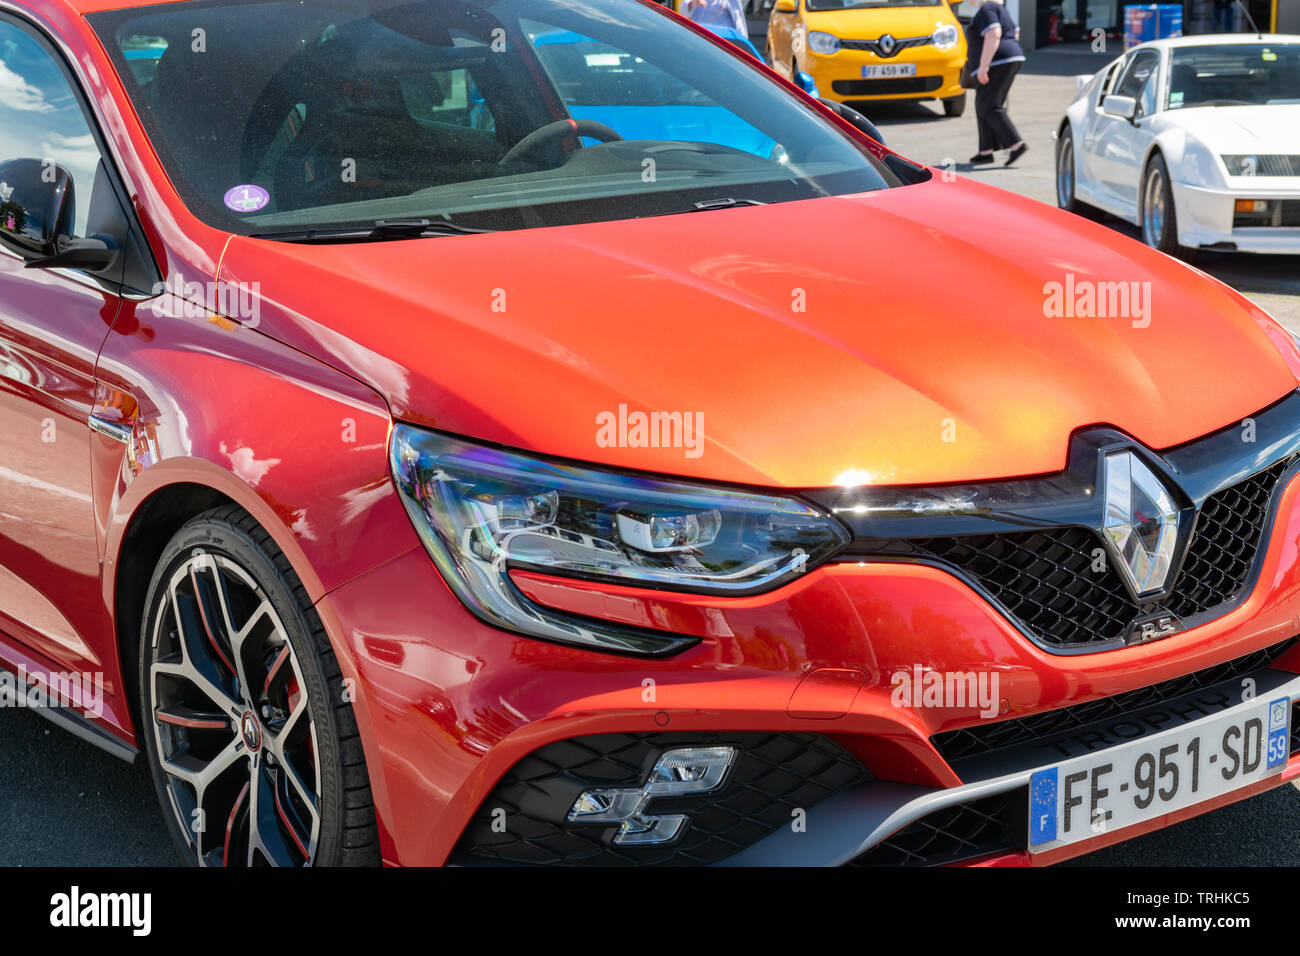 Wattrelos,FRANCE-June 02,2019: red Renault Megane IV RS,front view,car exhibited at the Renault Wattrelos Martinoire parking lot. Stock Photo